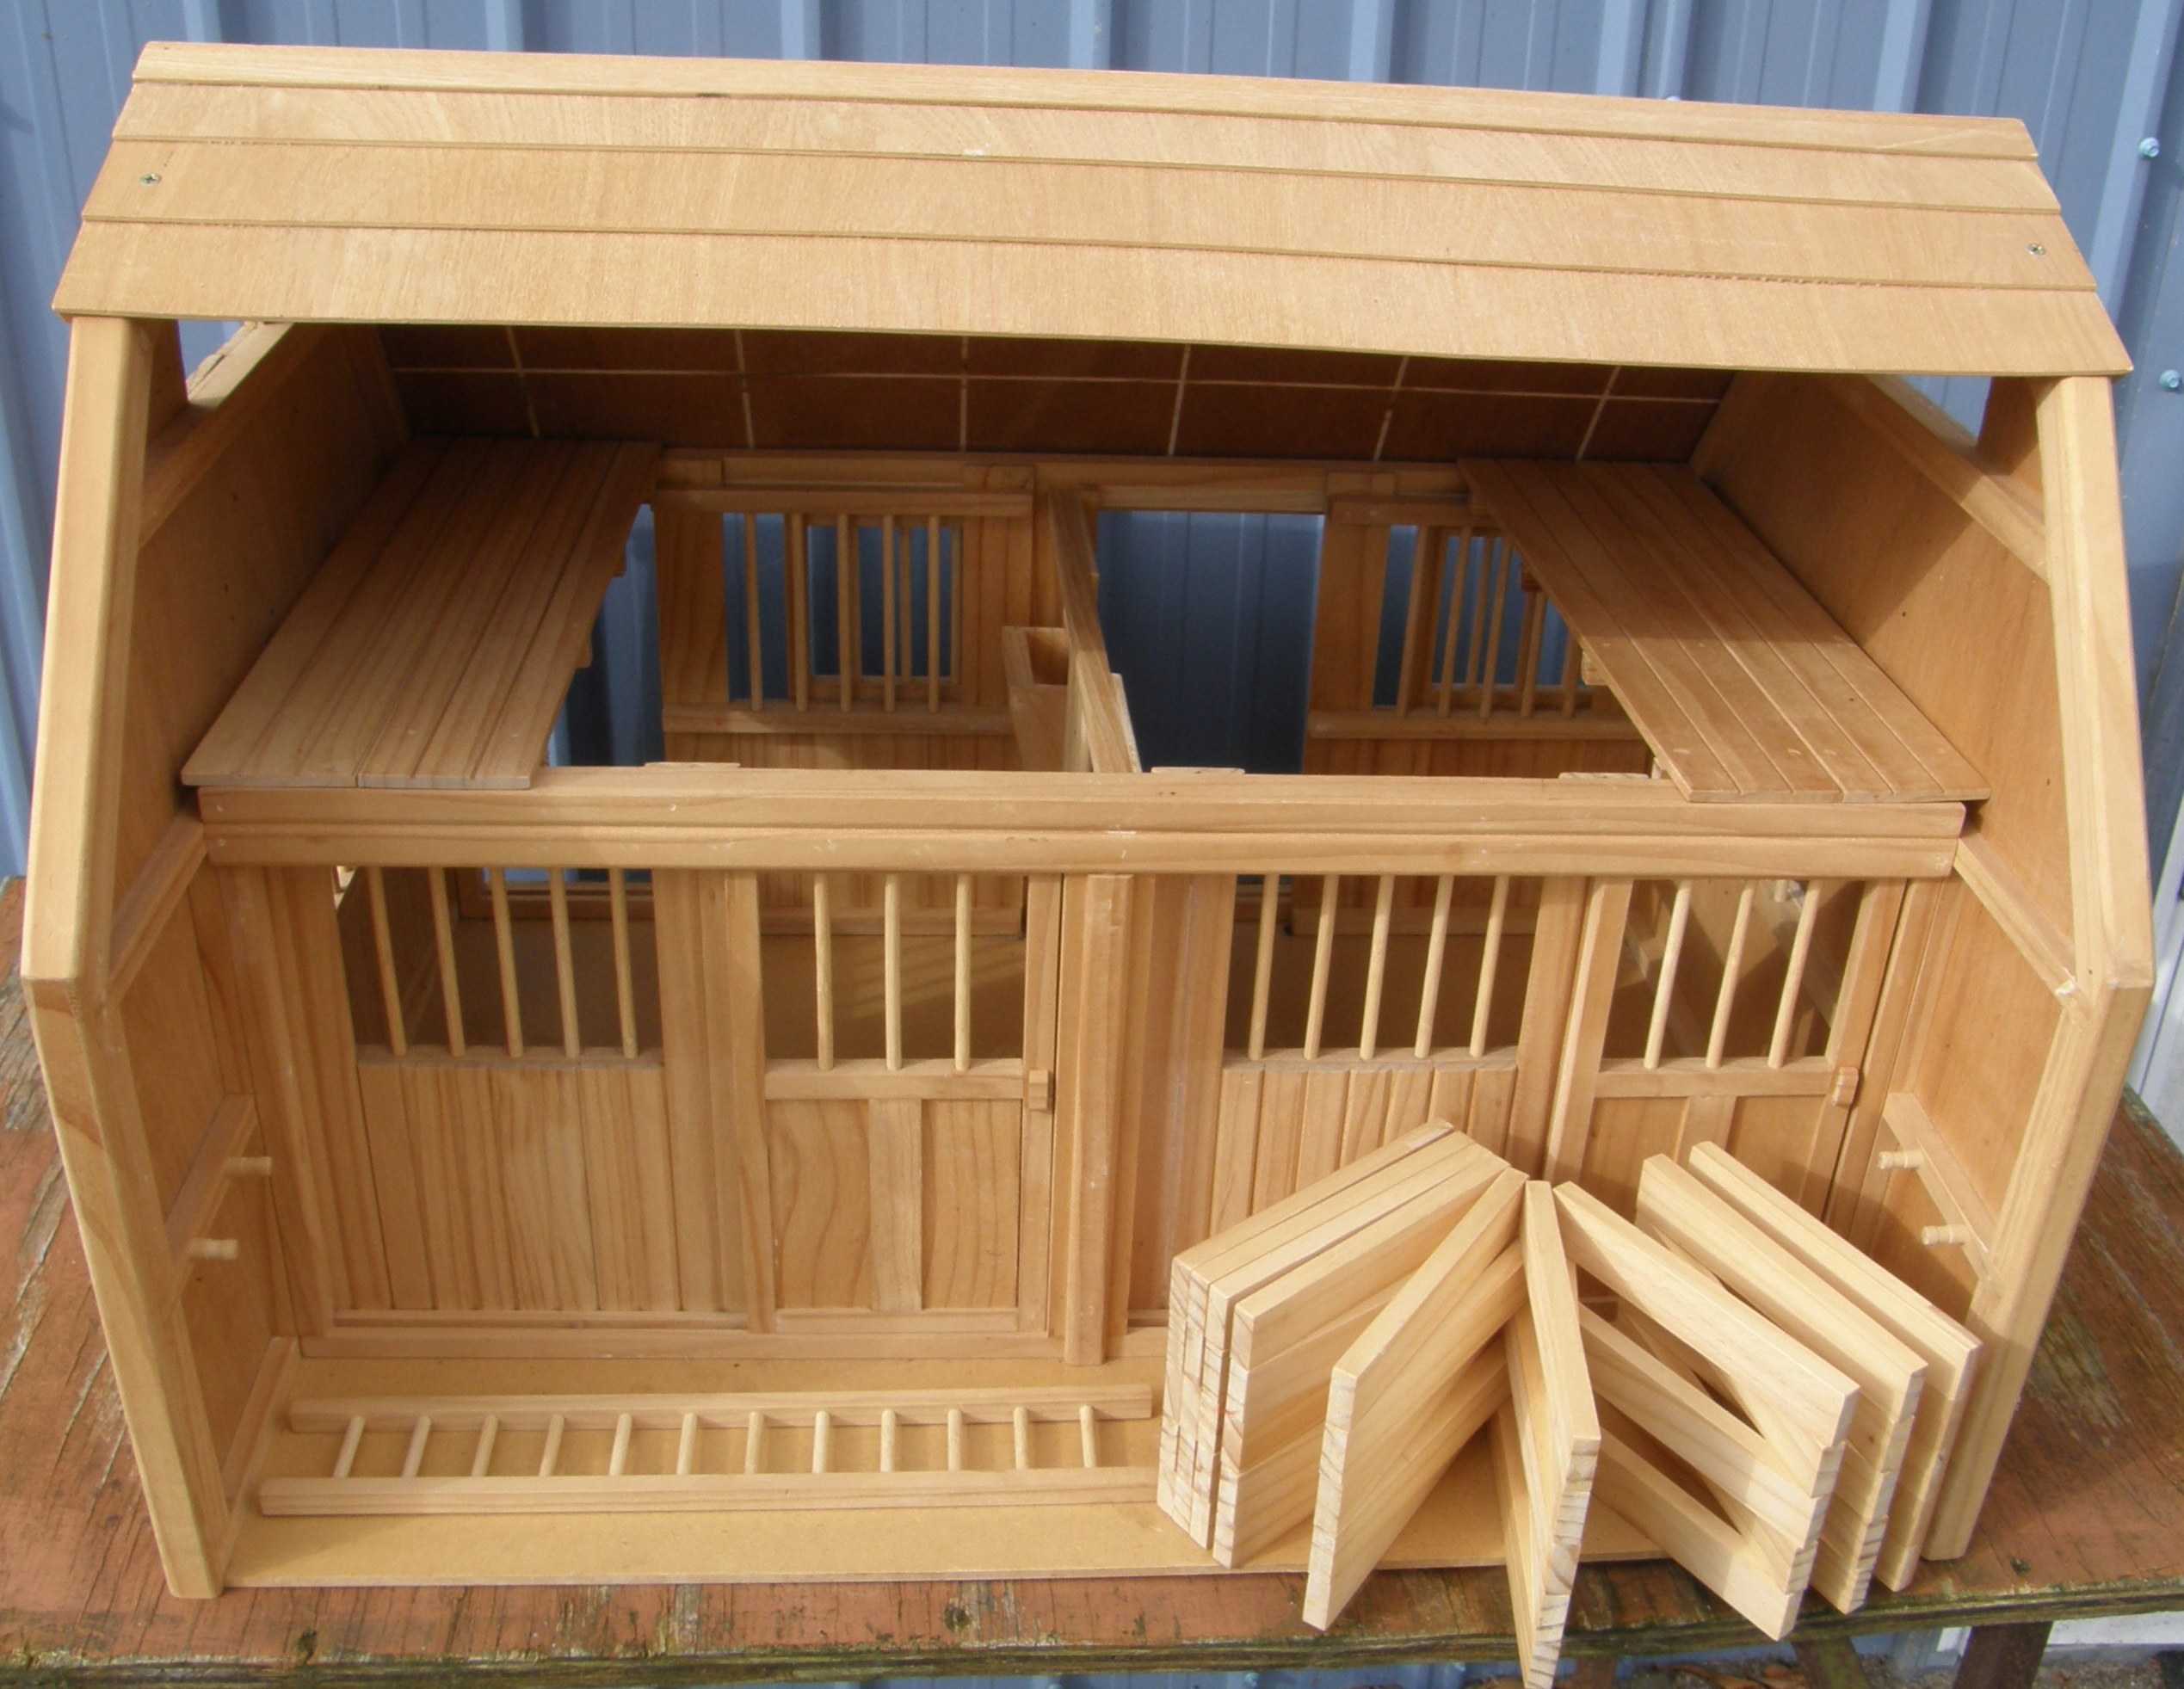 Toy Wooden Barns For Horses - Wooden Designs